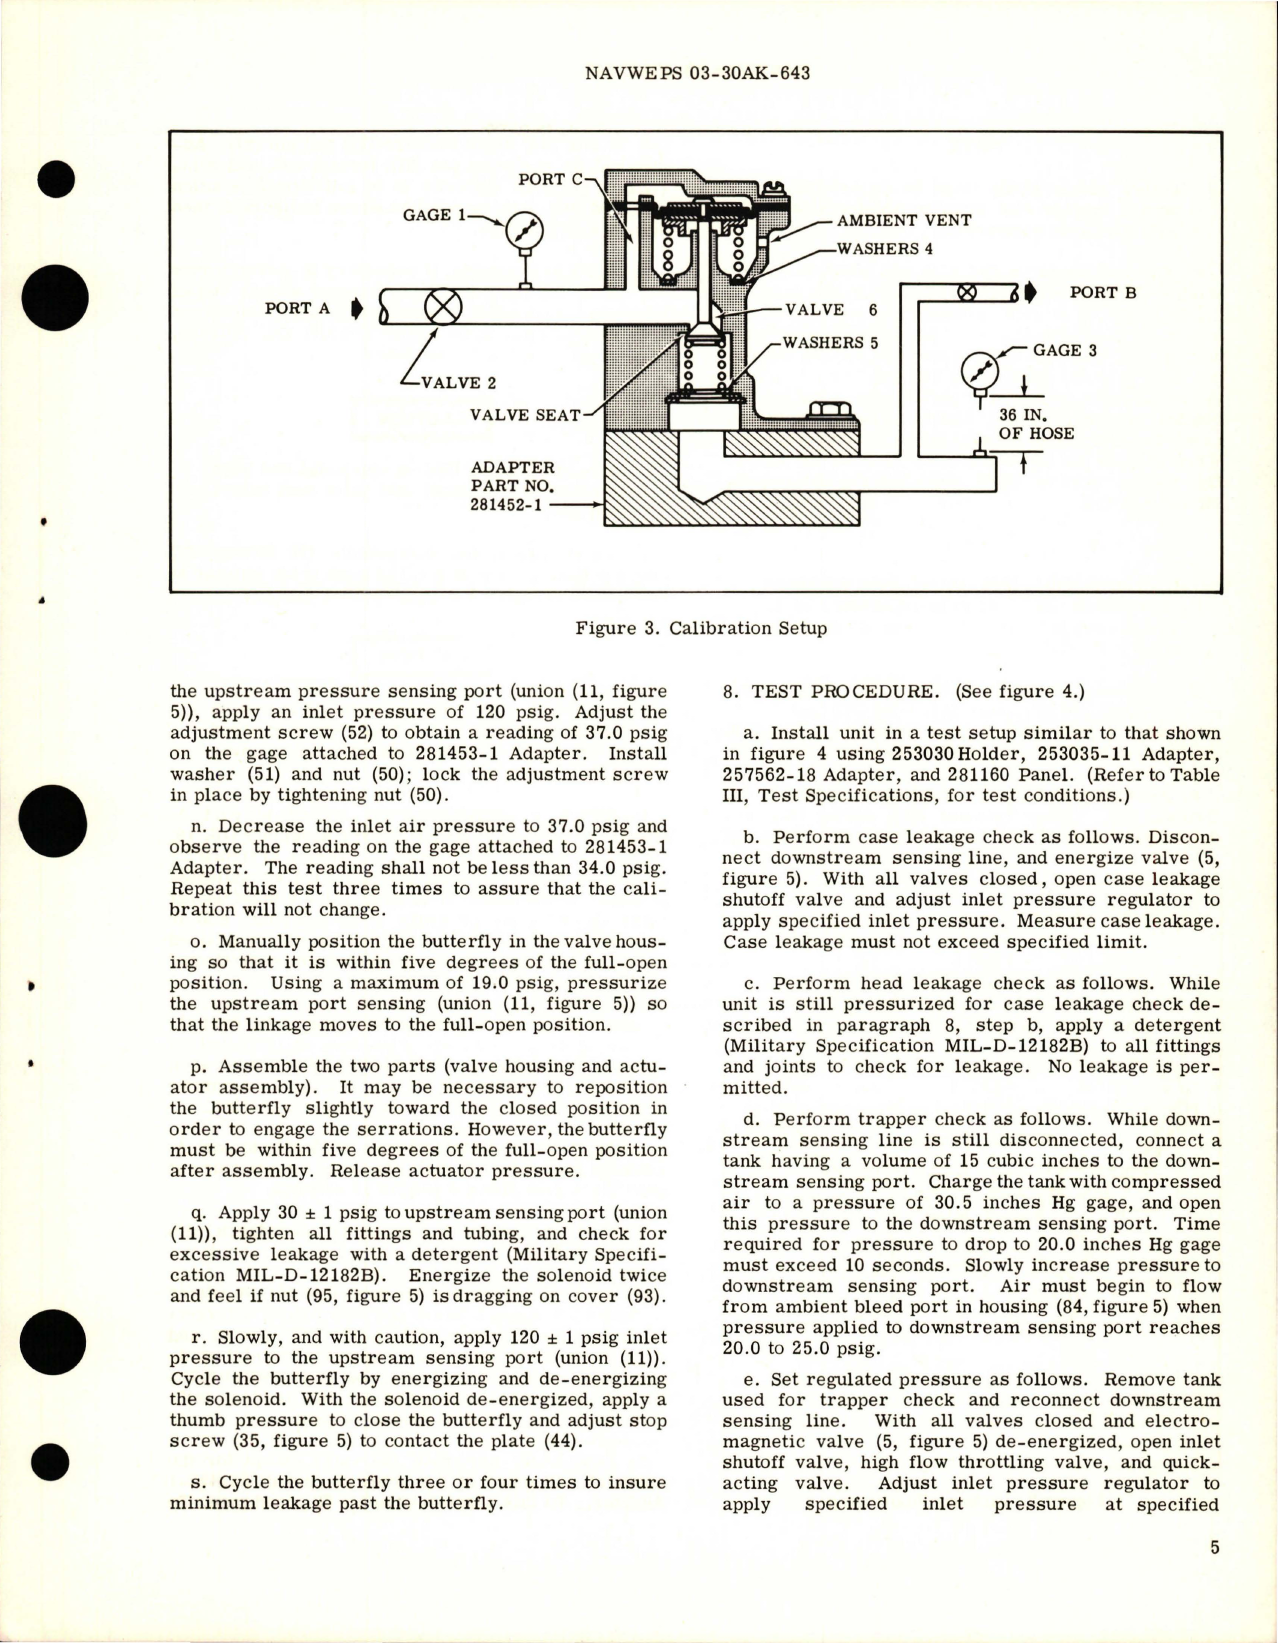 Sample page 7 from AirCorps Library document: Overhaul Instructions with Parts Breakdown for Pneumatic Air Pressure Regulator - 3 inch Diameter - Part 105460-320-2, SR 7